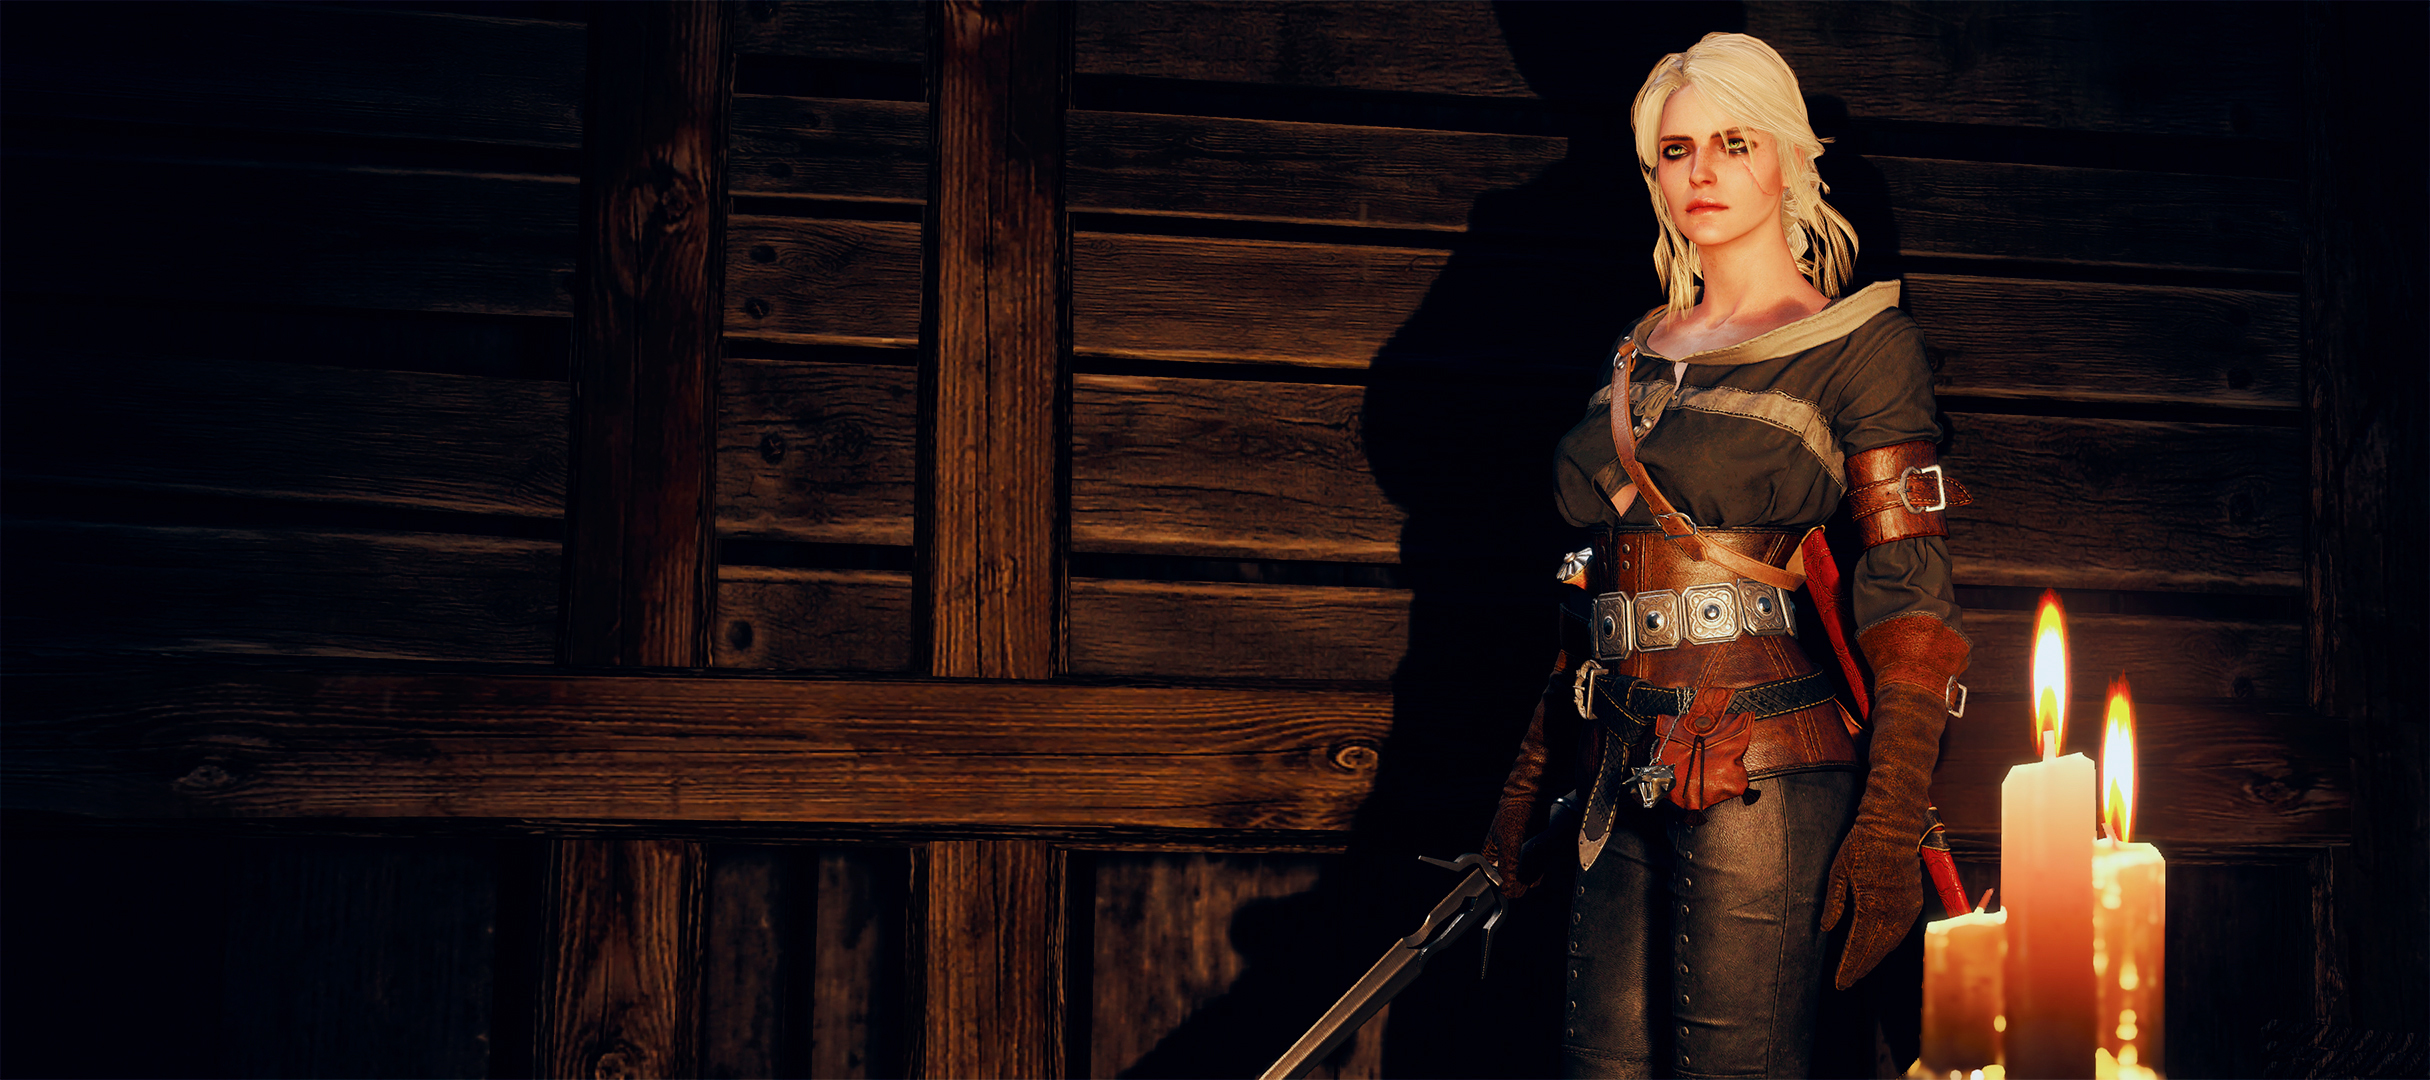 General 2430x1080 candles The Witcher Cirilla Fiona Elen Riannon CD Projekt RED screen shot blonde green eyes The Witcher 3: Wild Hunt video game characters